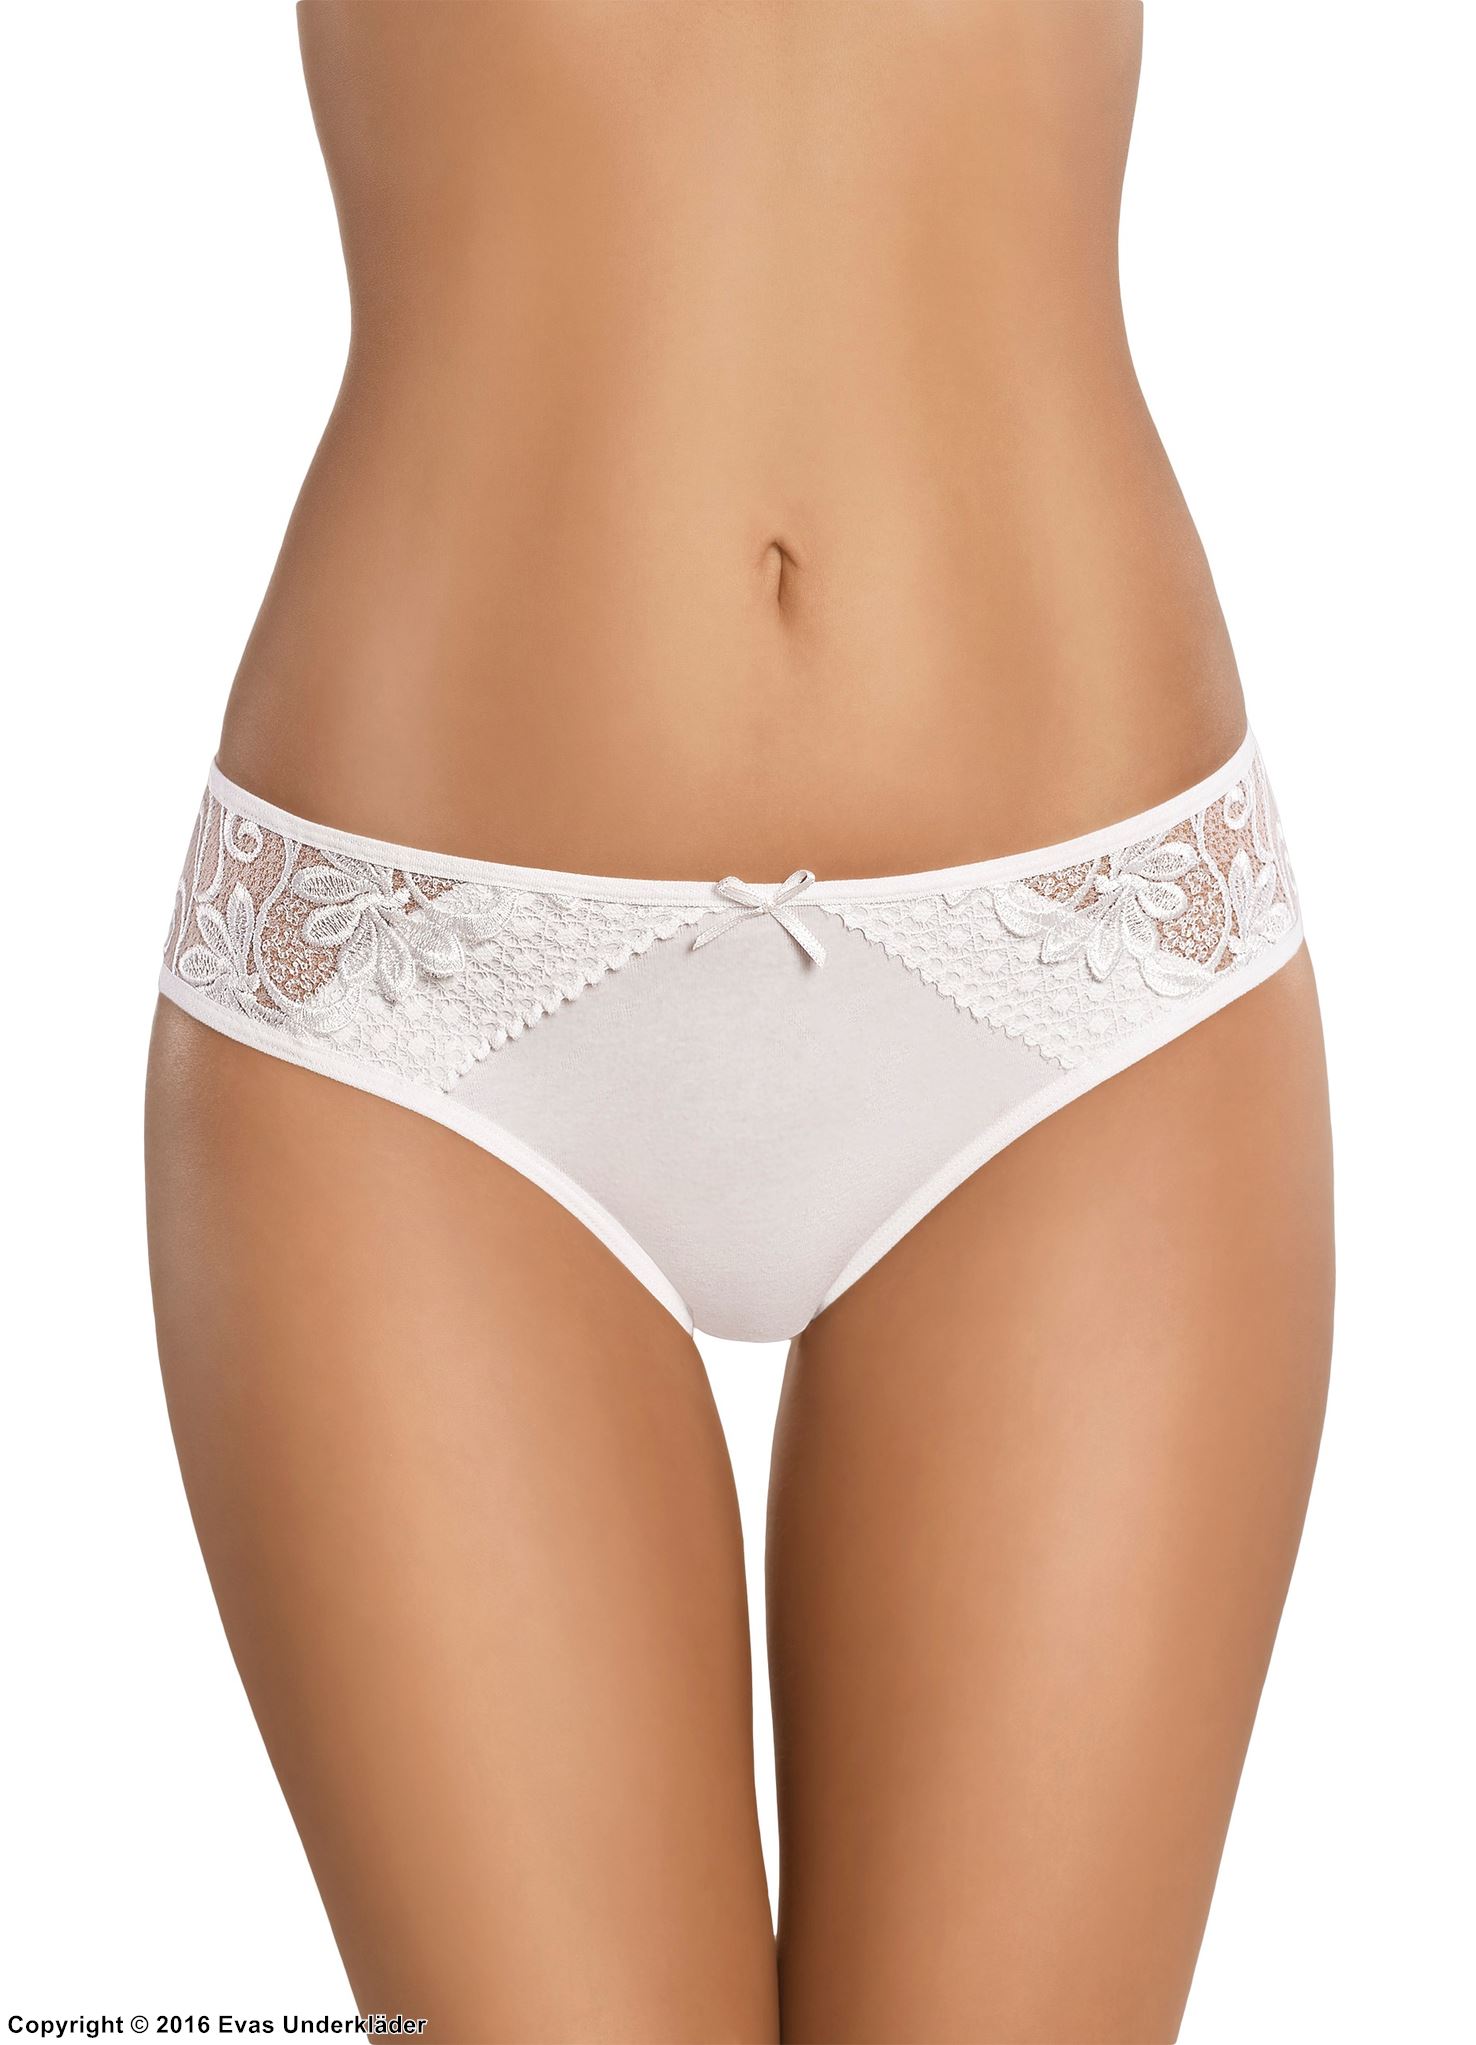 Classic briefs, high quality cotton, embroidery